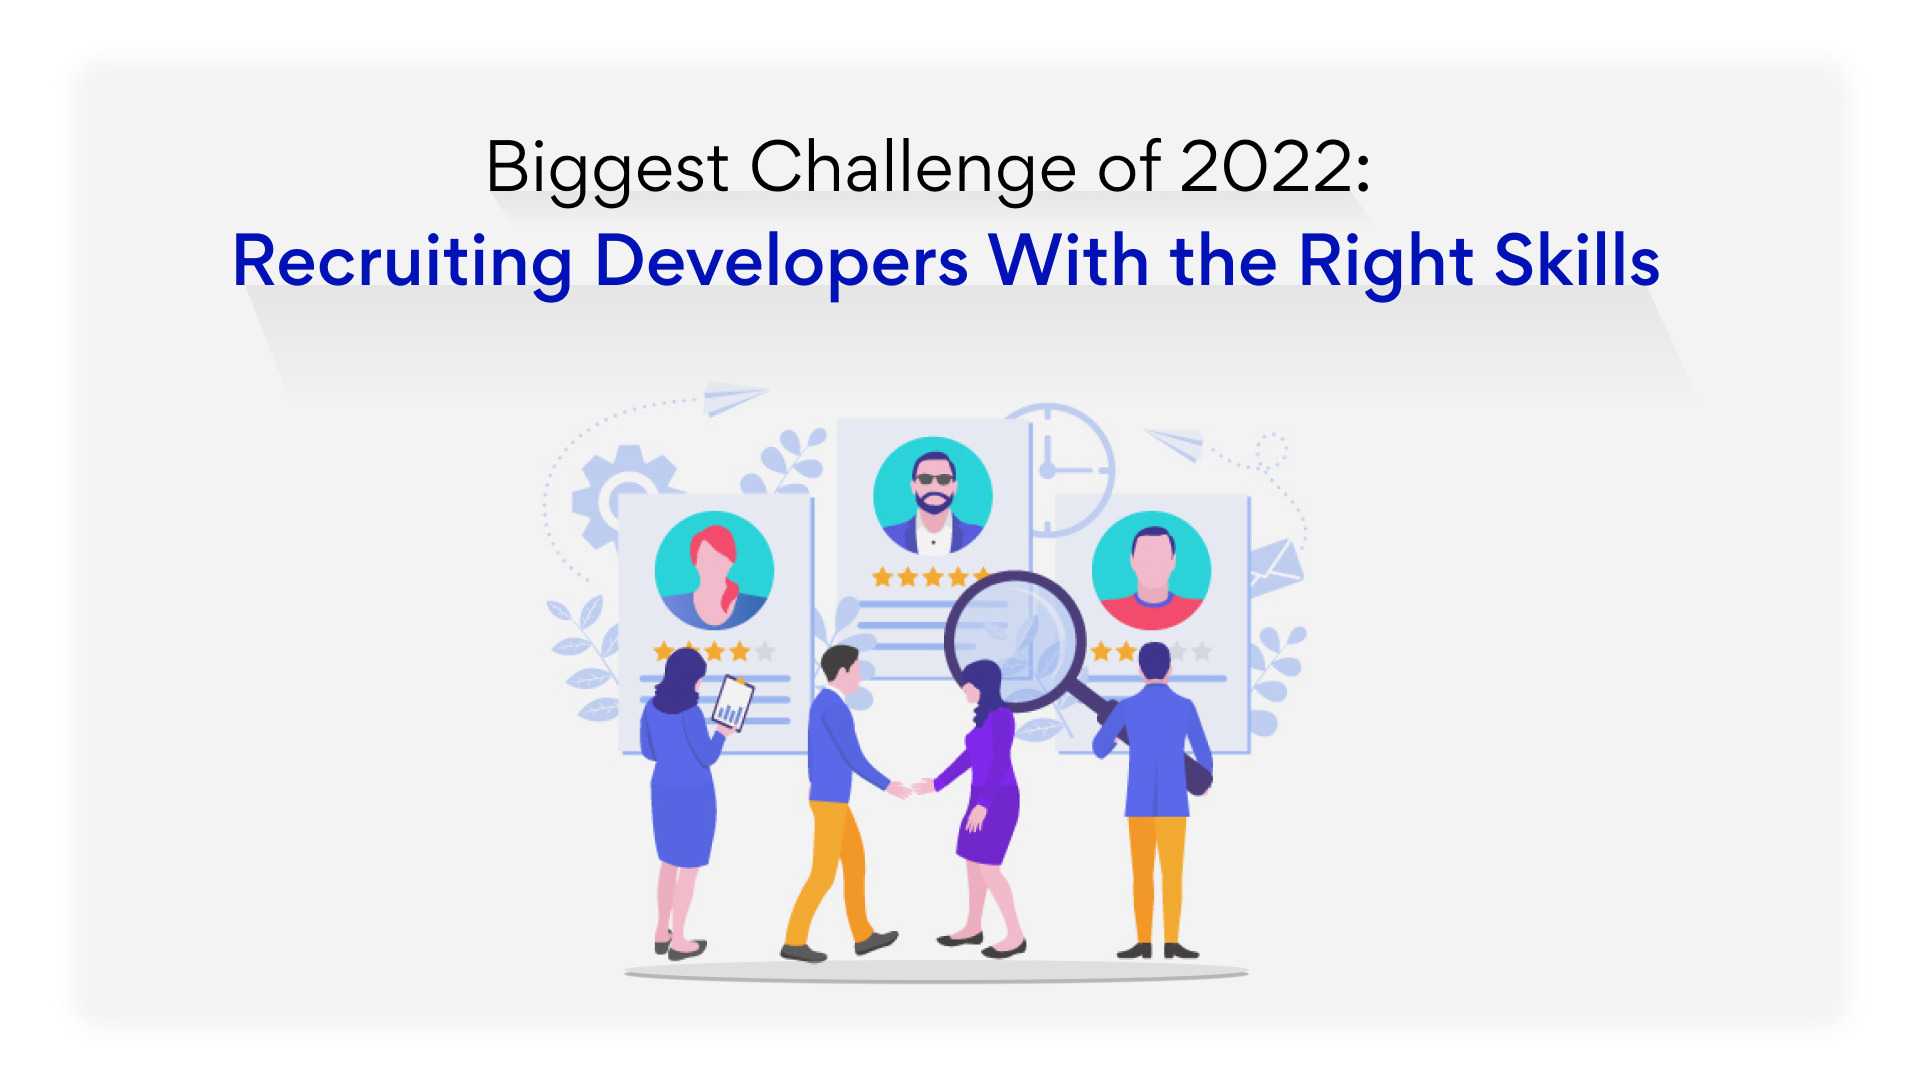 Recruiting right software developers a challenge in 2022